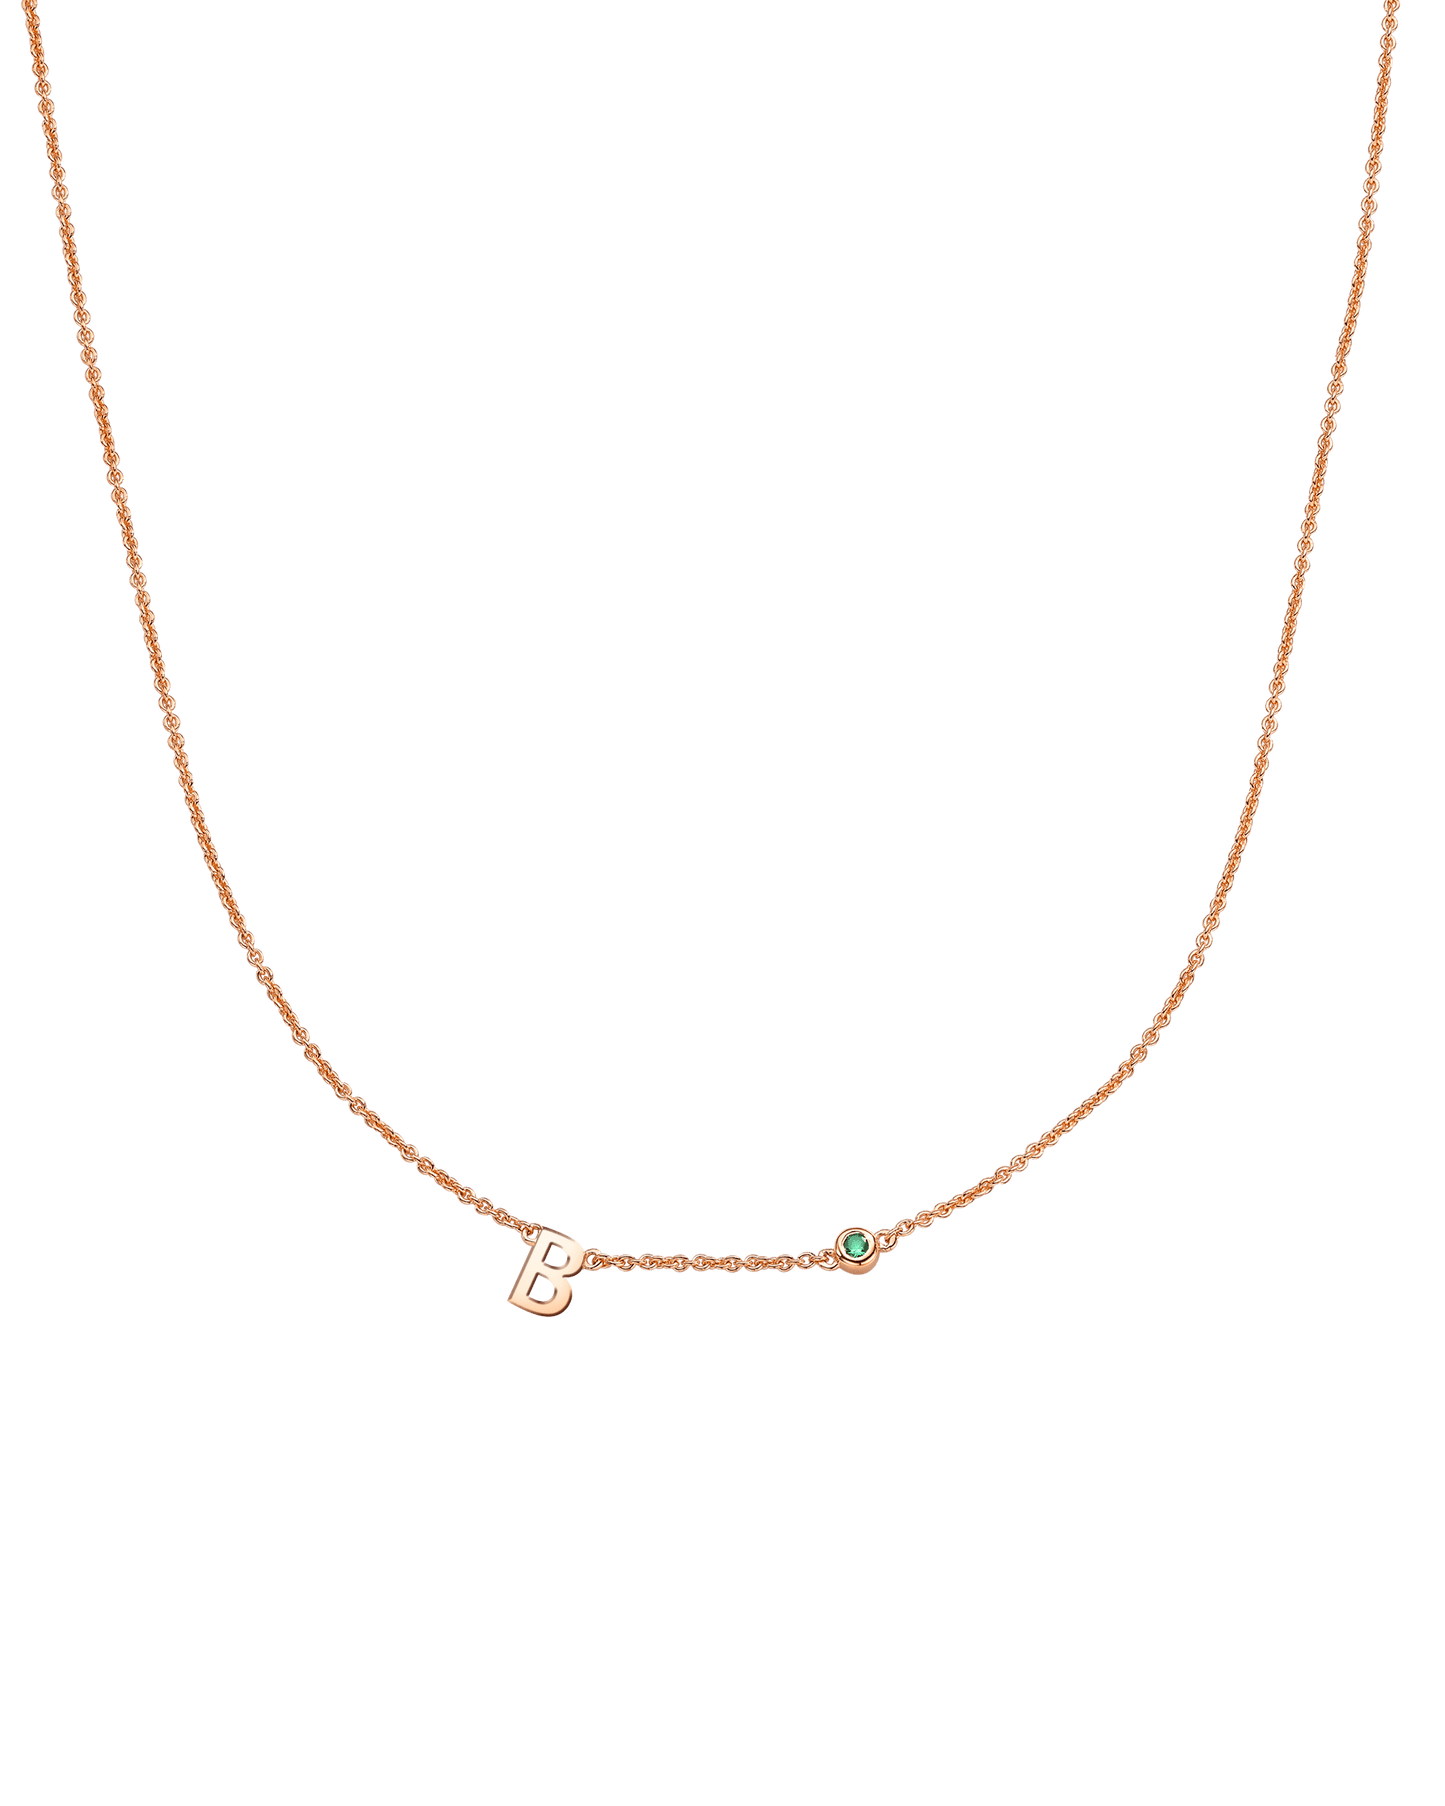 Initial Birthstone Necklace - 14K Rose Gold Necklaces magal-dev 1 Initial + 1 Birthstone Adjustable 16-17" (40cm-43cm) 